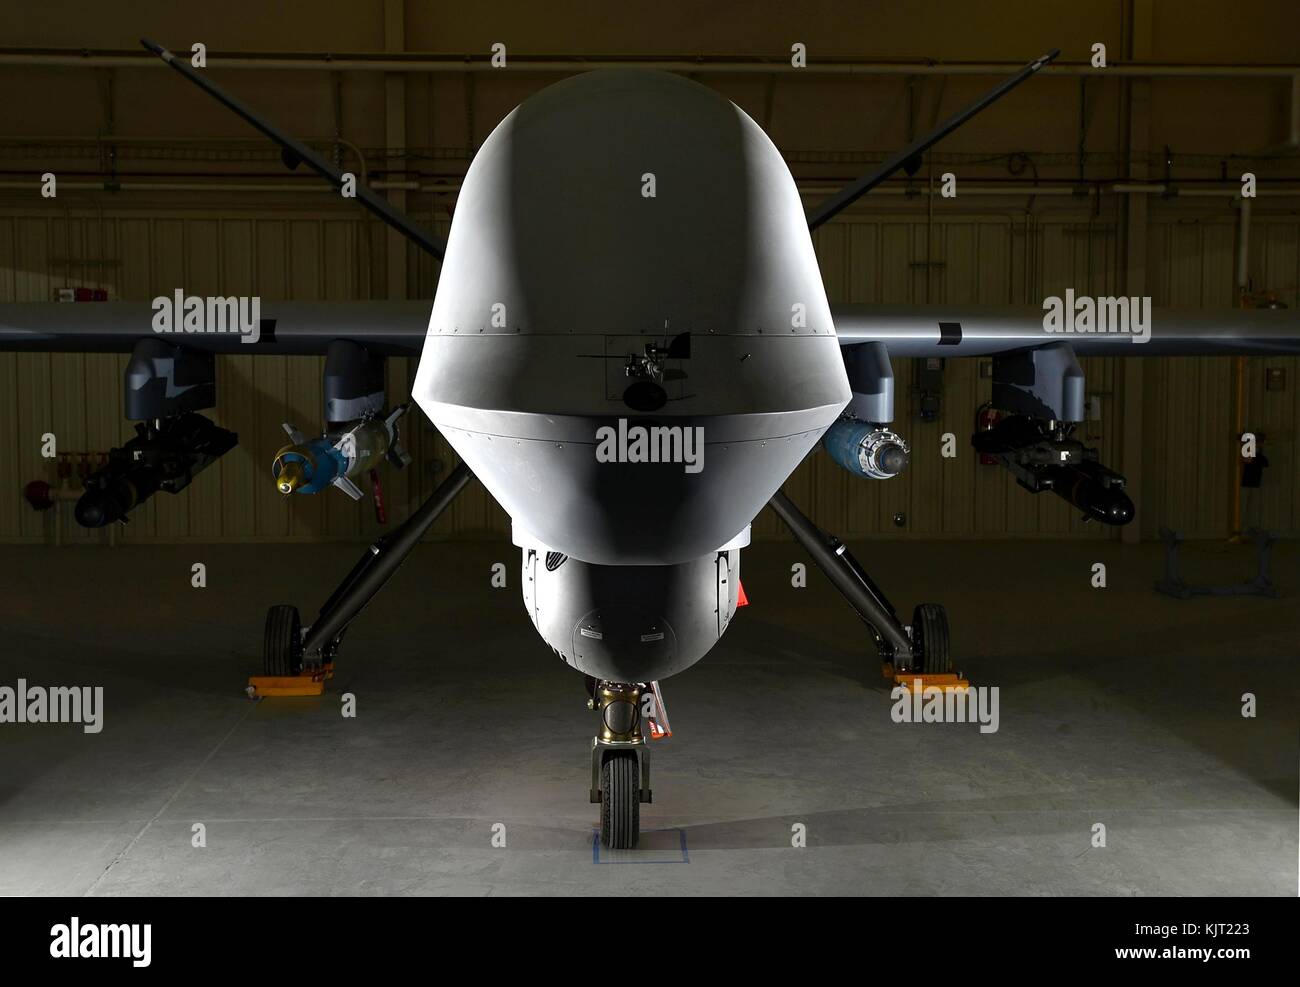 A U.S. Air Force MQ-9 Reaper Predator B unmanned aerial vehicle loaded with AGM-114 Hellfire missiles, a GBU-12 Paveway II laser-guided bomb, and a GBU-38 joint direct attack munition sits in the hanger at the Creech Air Force Base April 13, 2017 in Indian Springs, Nevada. (photo by Christian Clausen via Planetpix) Stock Photo